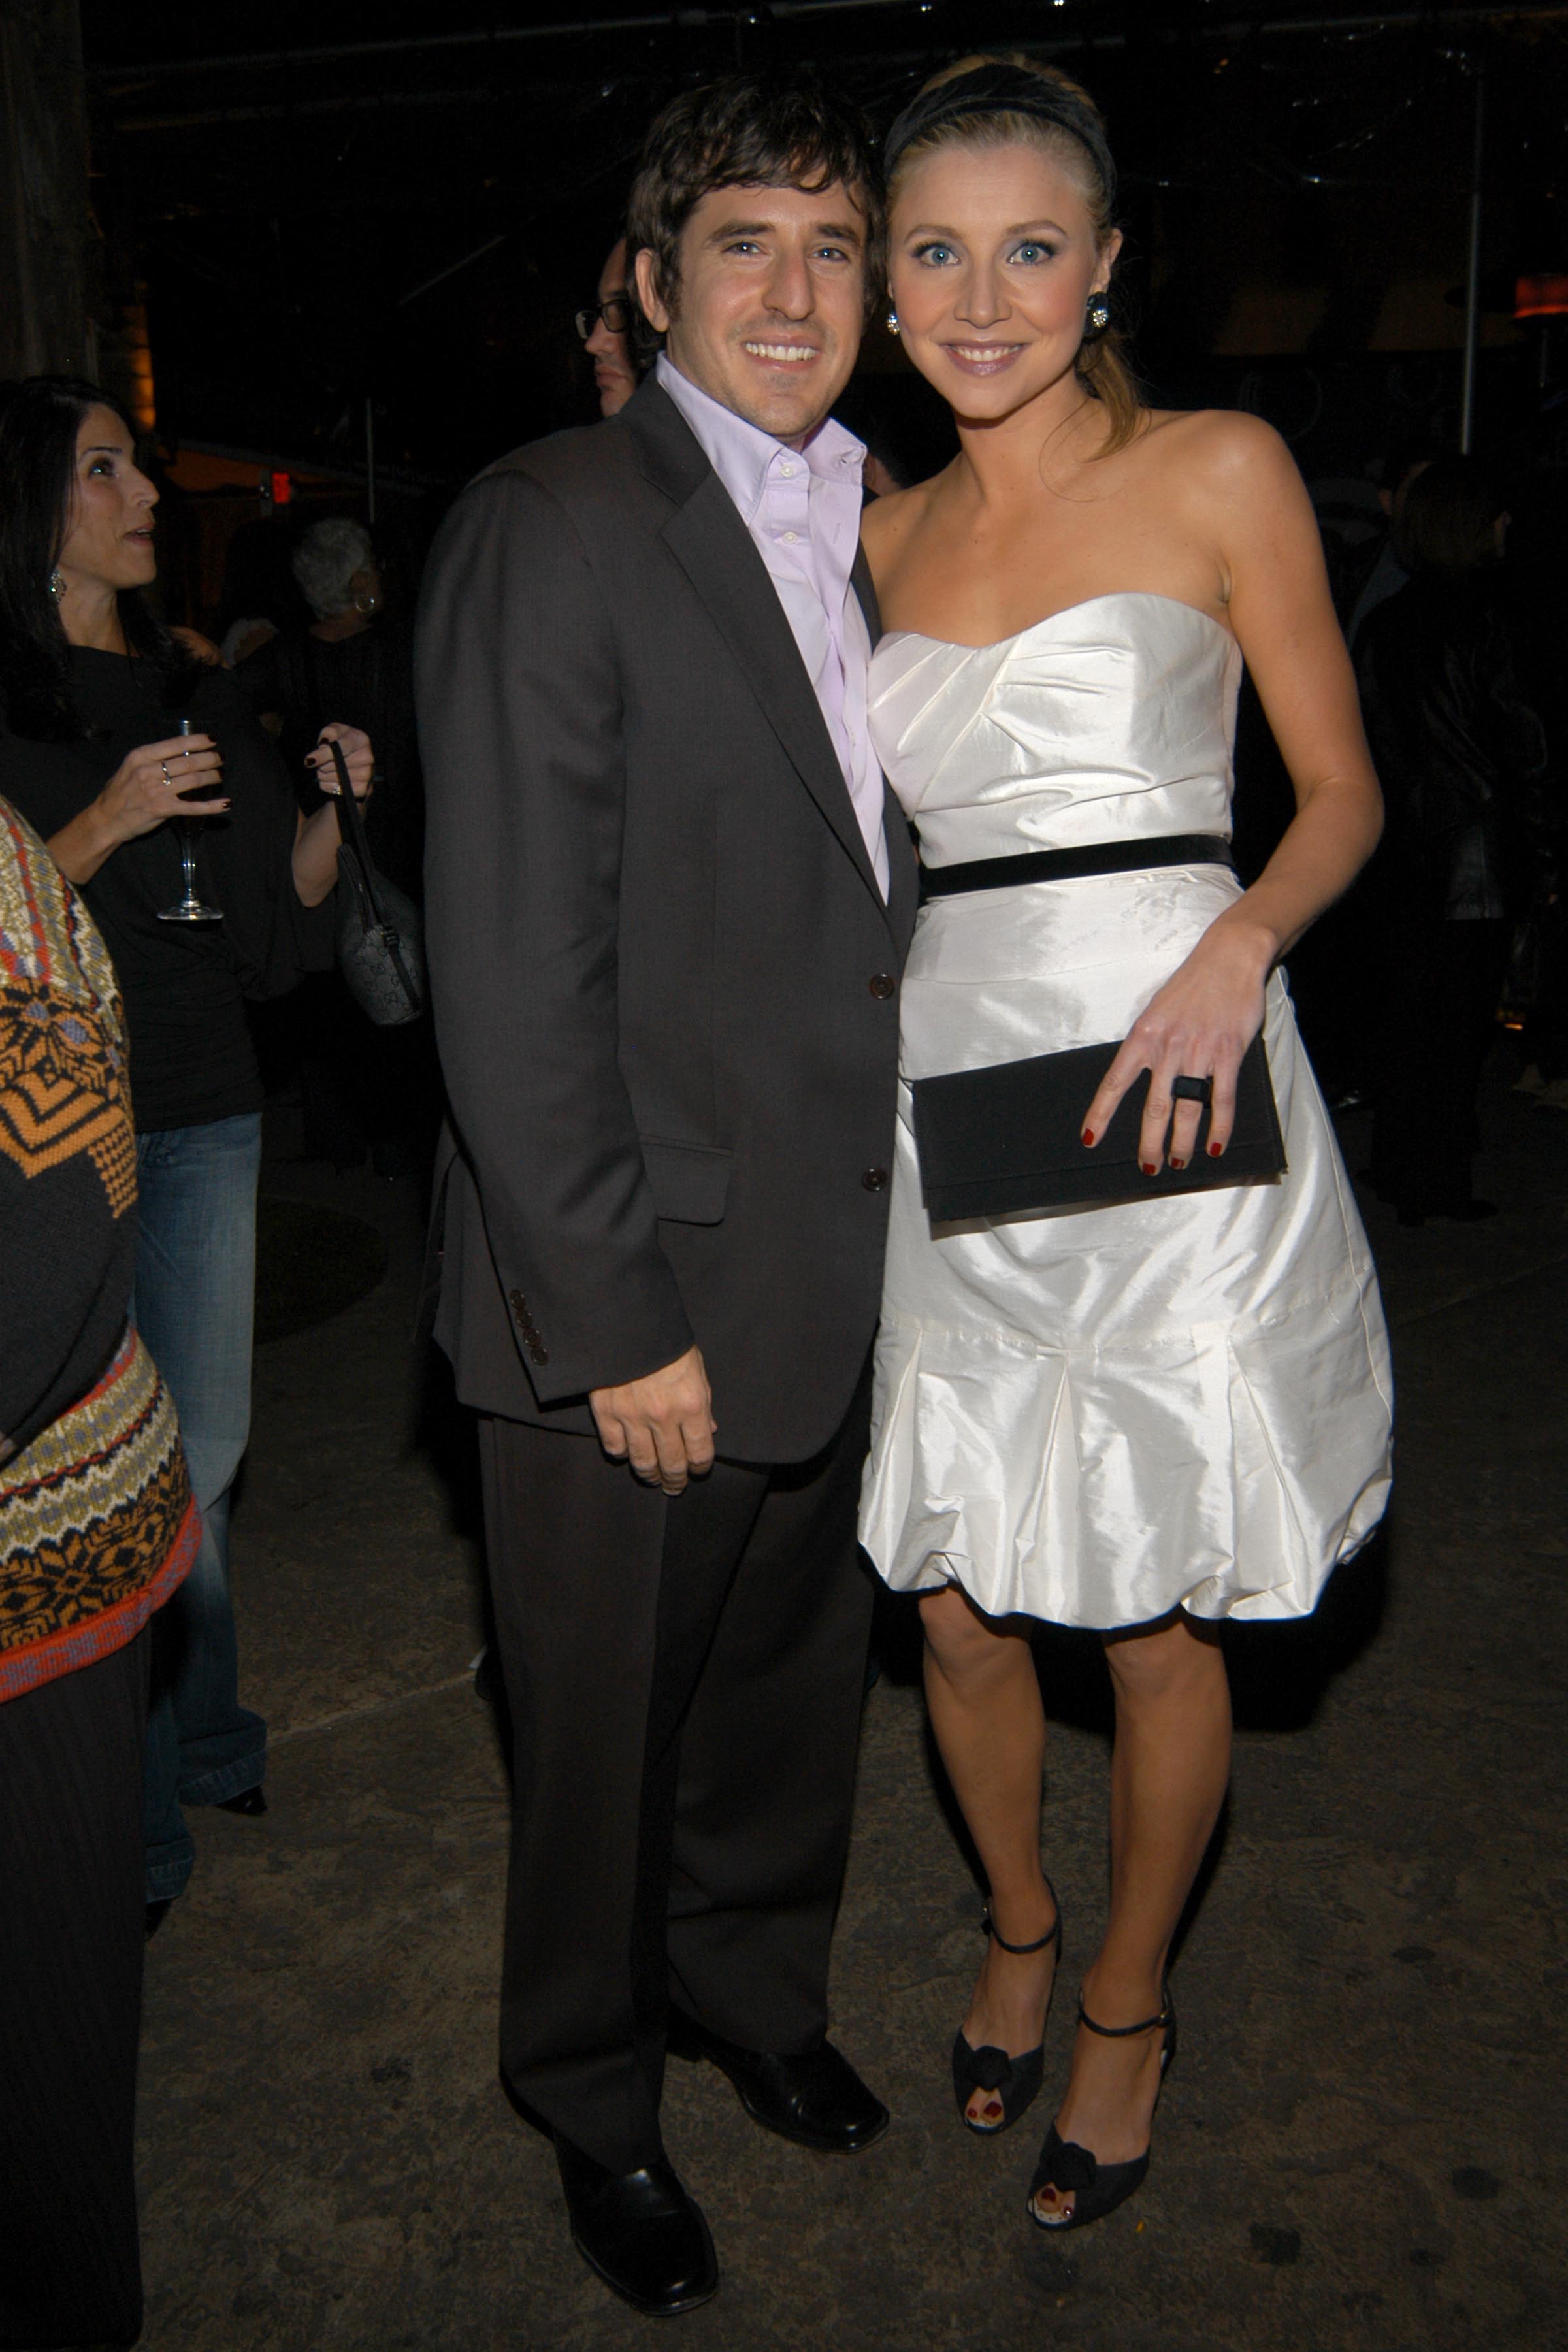 Jamie Afifi and Sarah Chalke at the celebration for "Scrubs" 100th Celebration on January 14, 2006 in California | Source: Getty Images 